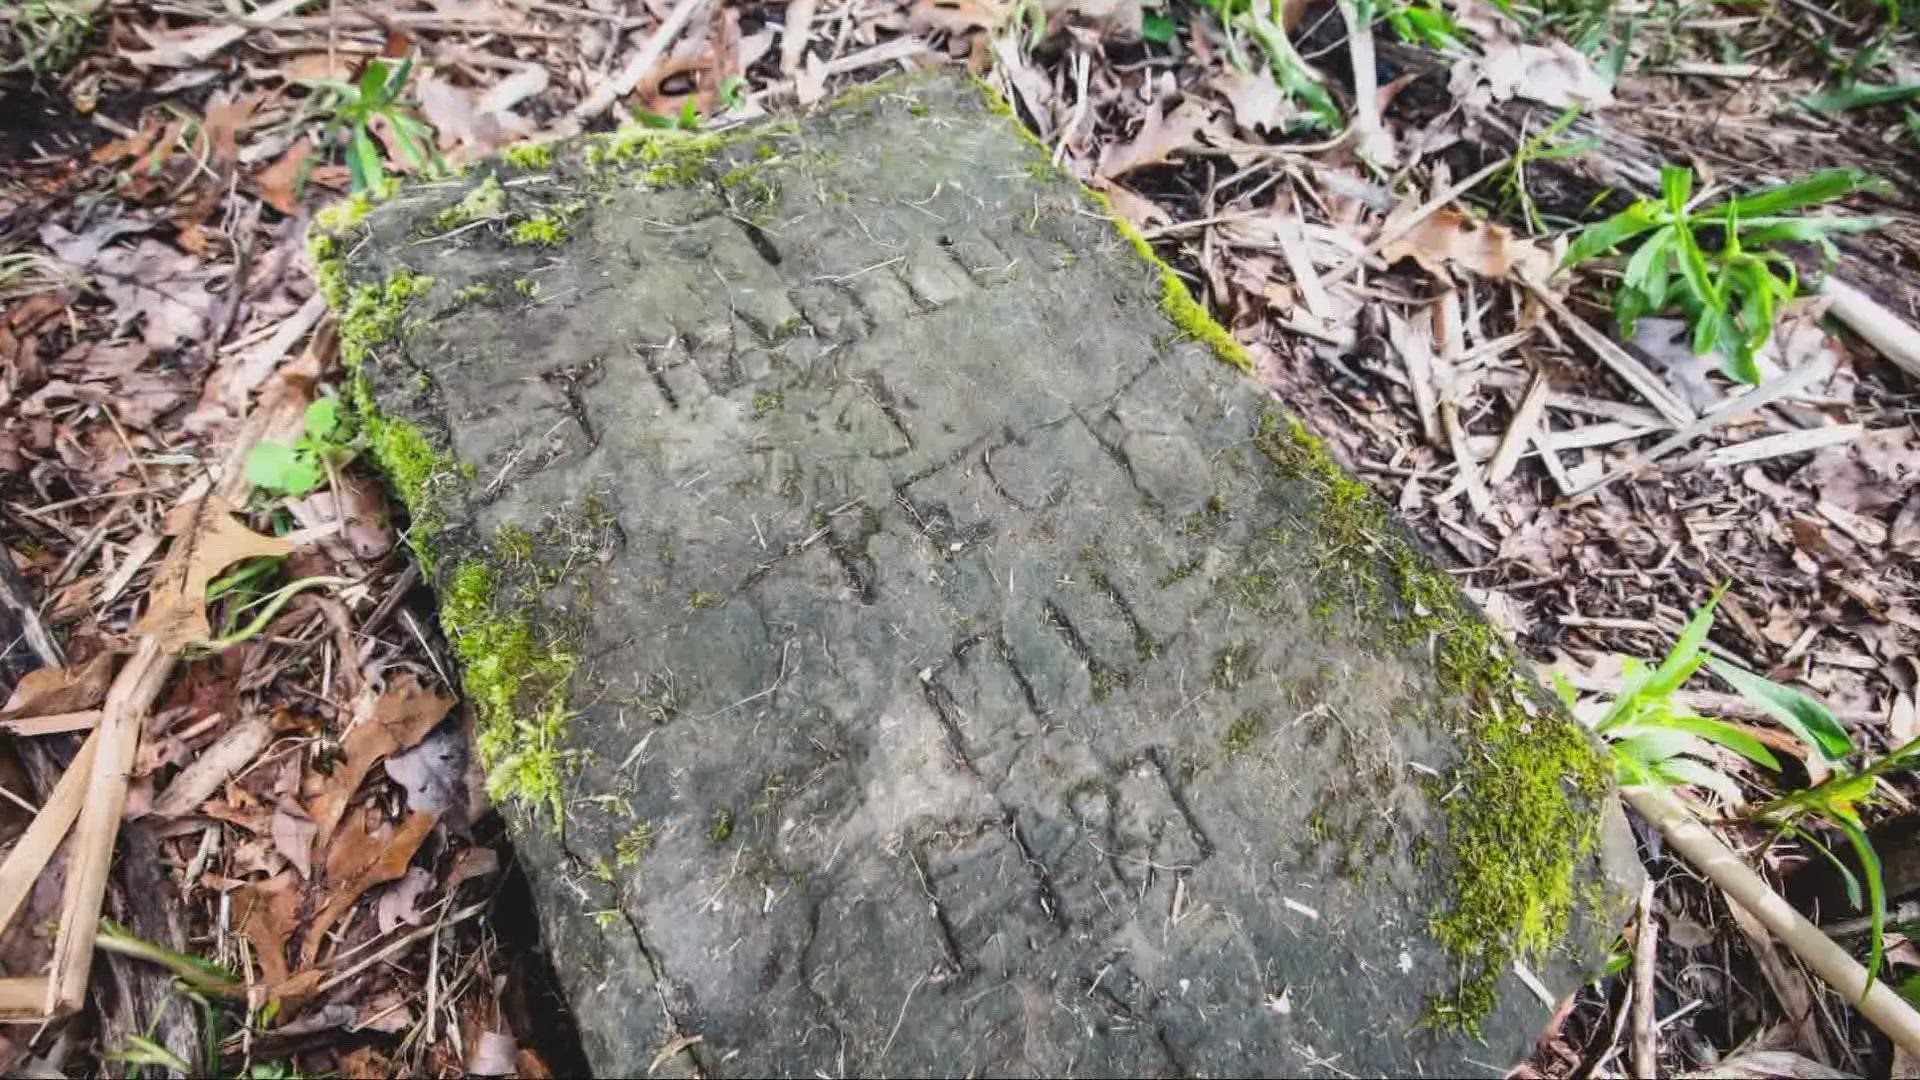 The name etched on the stone is Thadius Peck (1711-1781). The gravestone weighs over 200 pounds and measures 24"x15"x6." It was found along the Cuyahoga River.